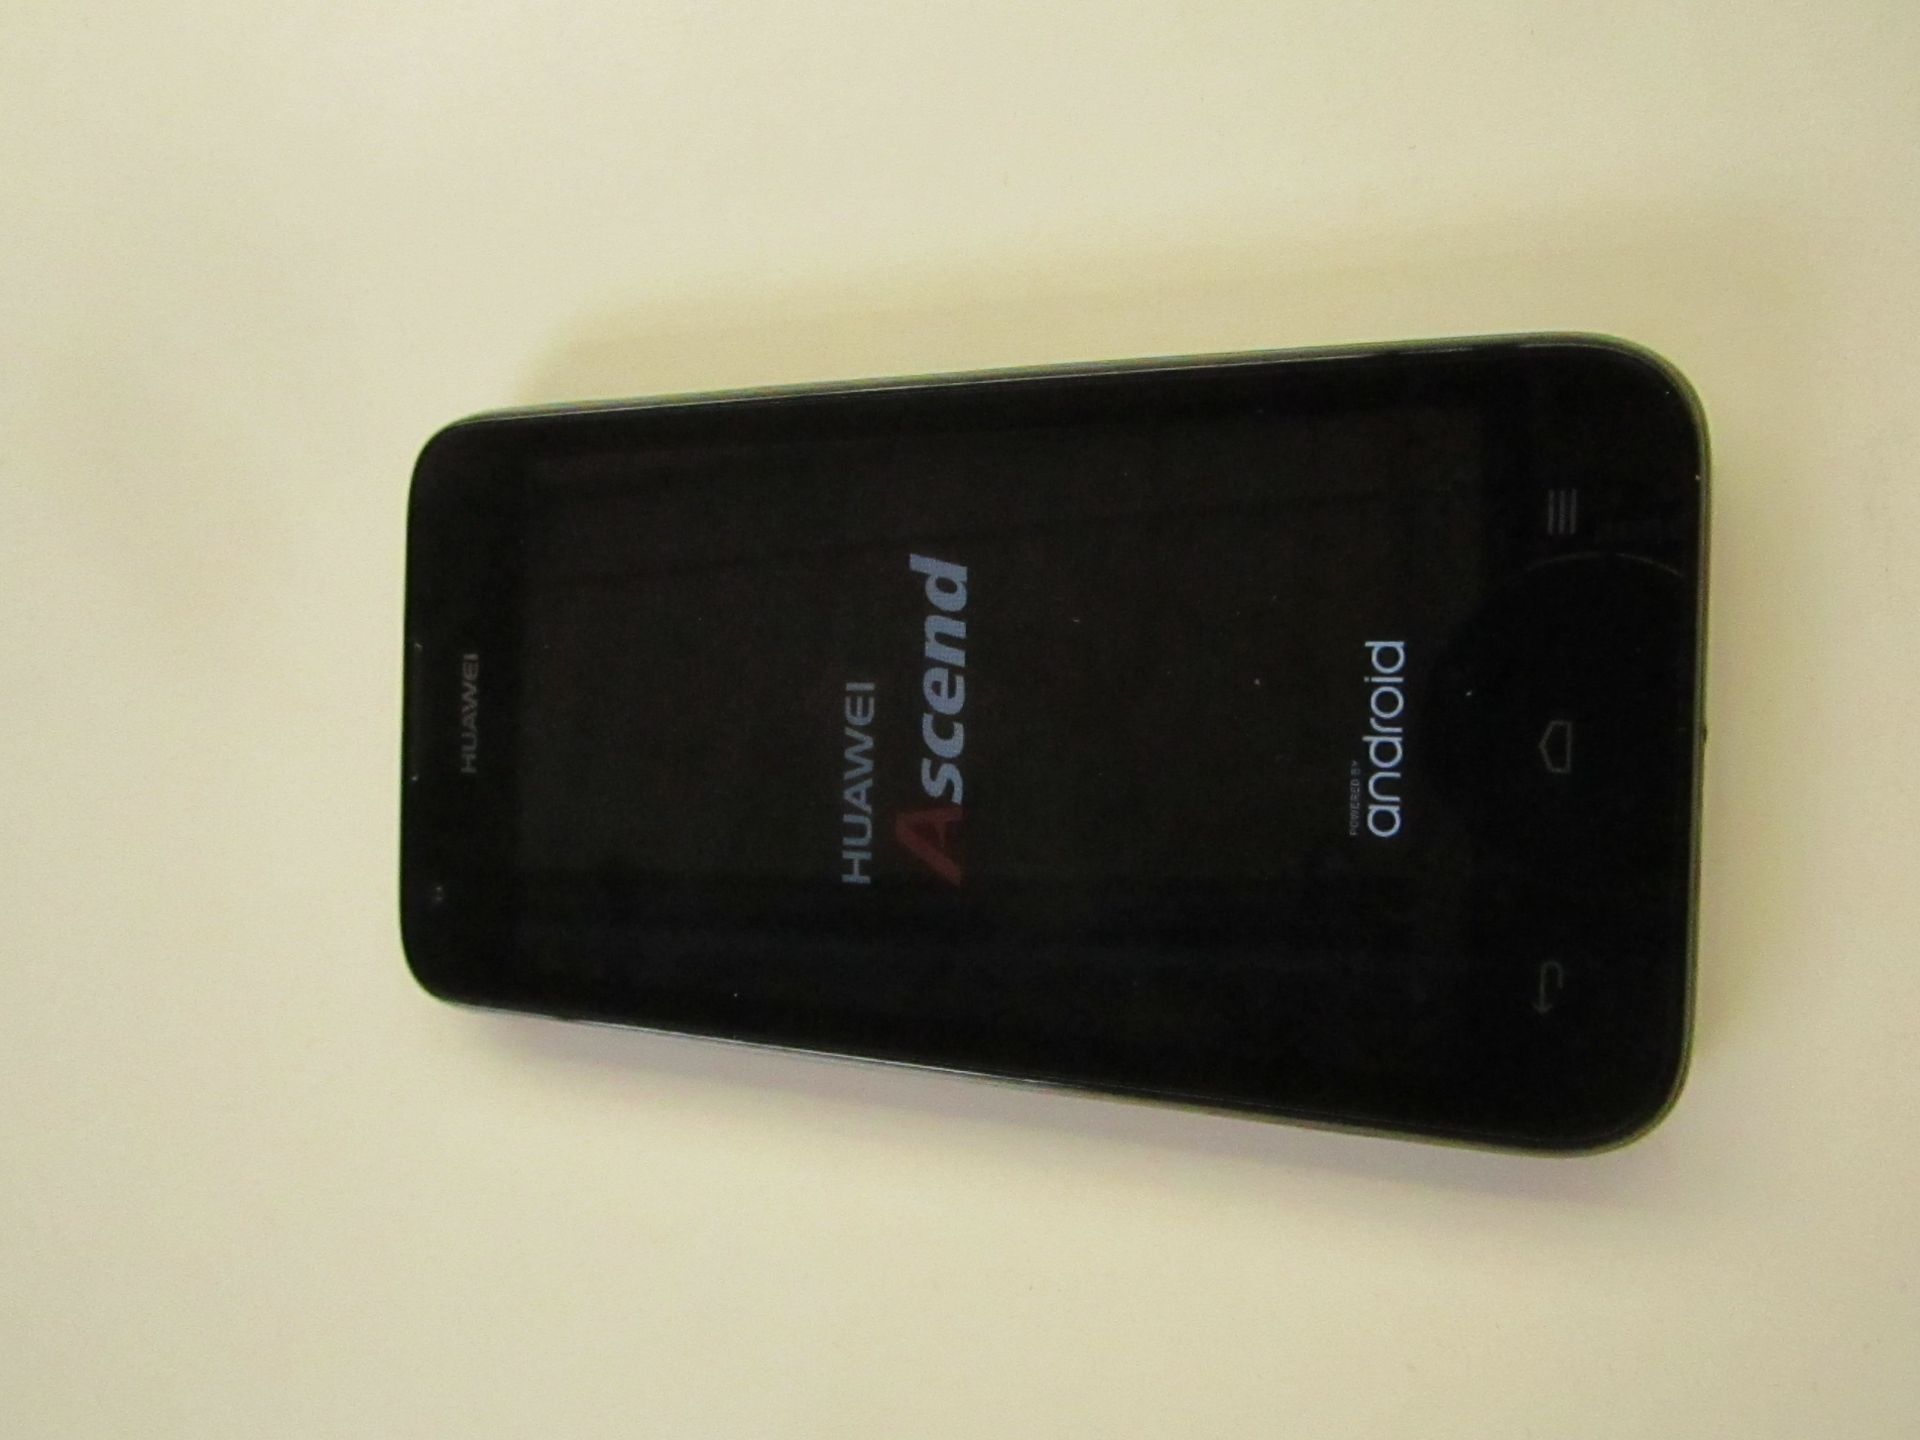 Huawei Ascend Y550, 4GB, tested working. Comes with box RRP £69.95